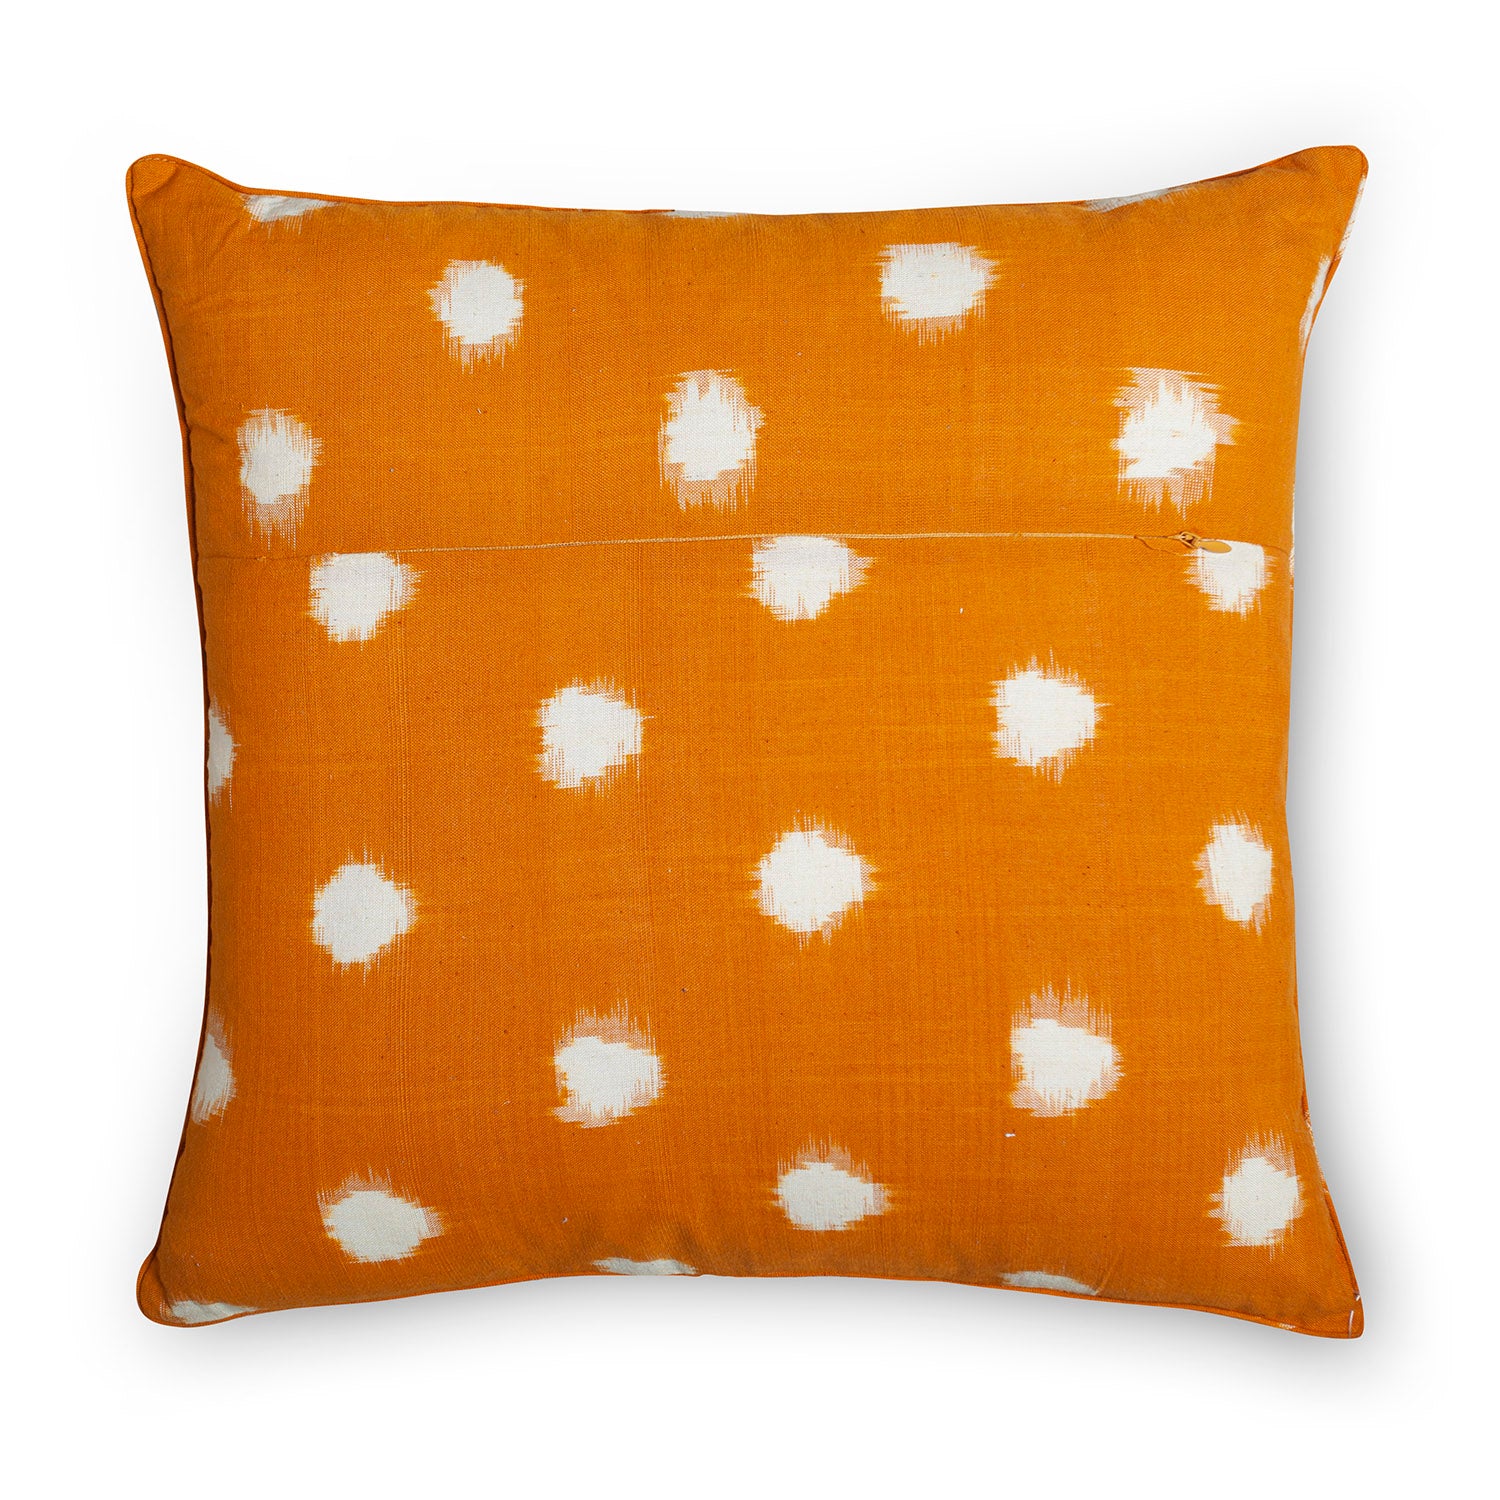 Embroidered Cotton Ikat Cushion Cover - 18x18